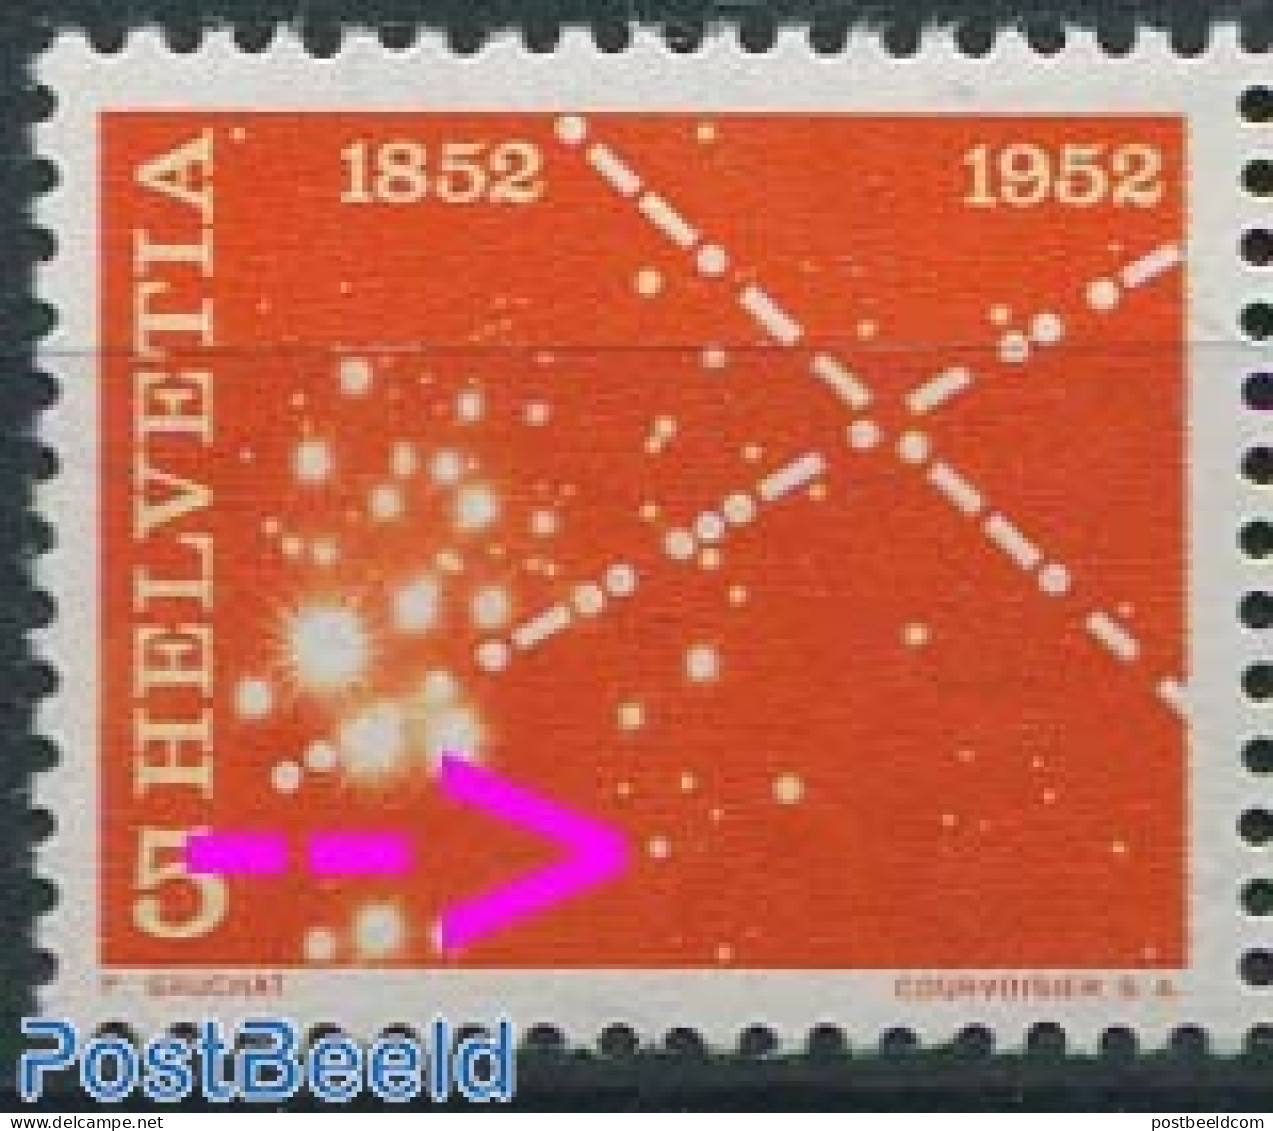 Switzerland 1952 5c, Plate Flaw, Extra Star, Mint NH, Various - Errors, Misprints, Plate Flaws - Unused Stamps